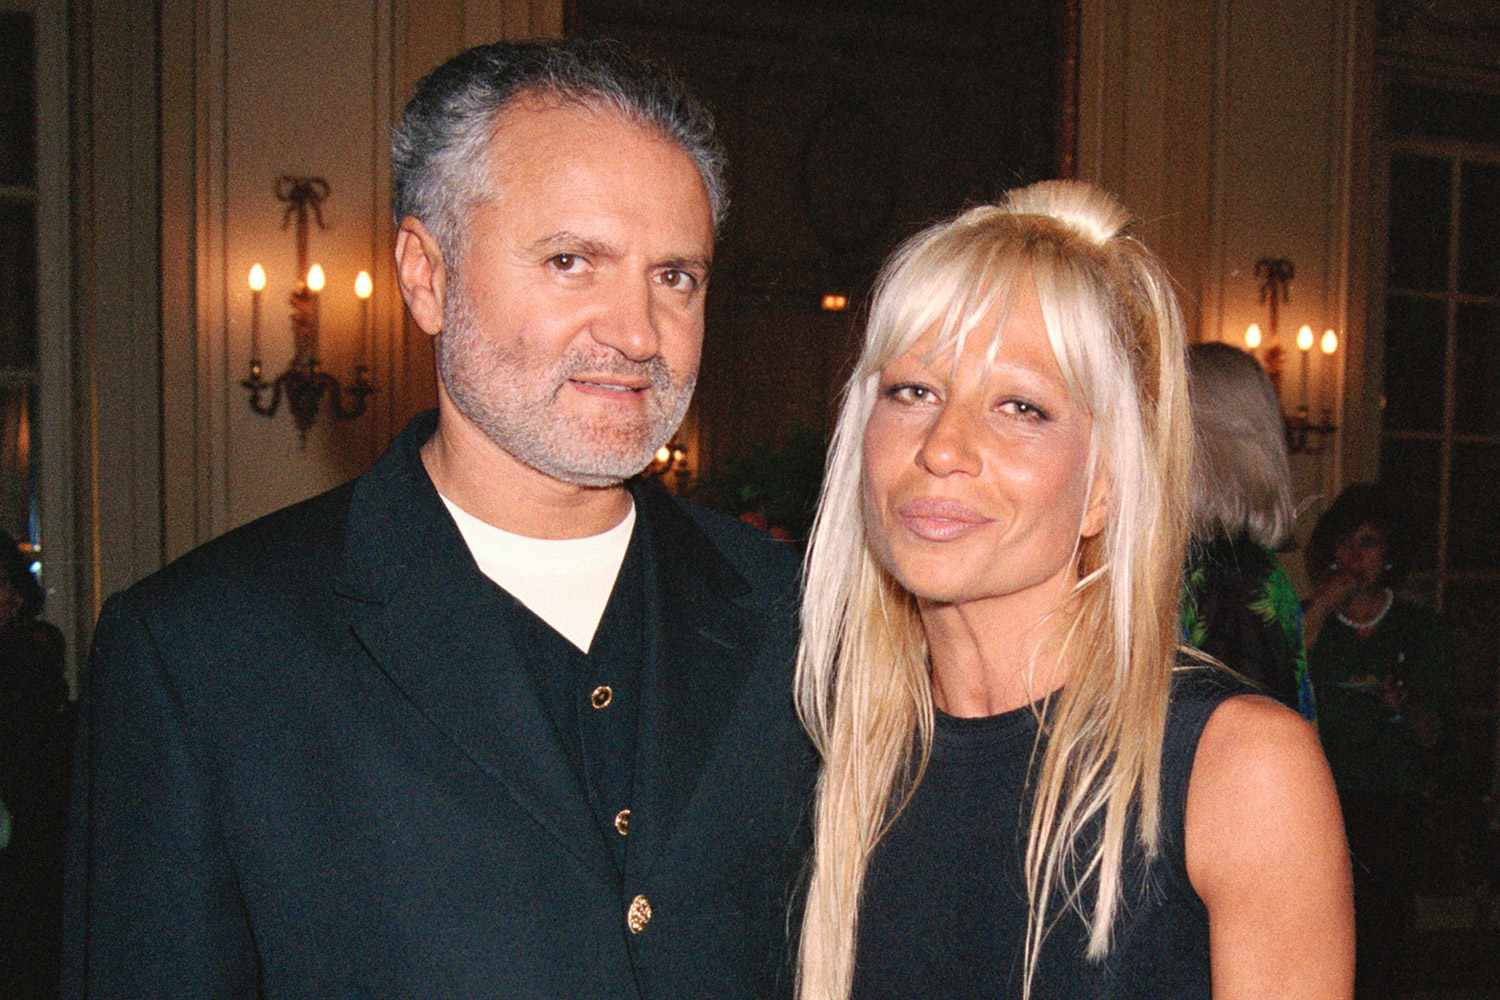 Donatella Versace was the first person her brother Gianni Versace came out to.